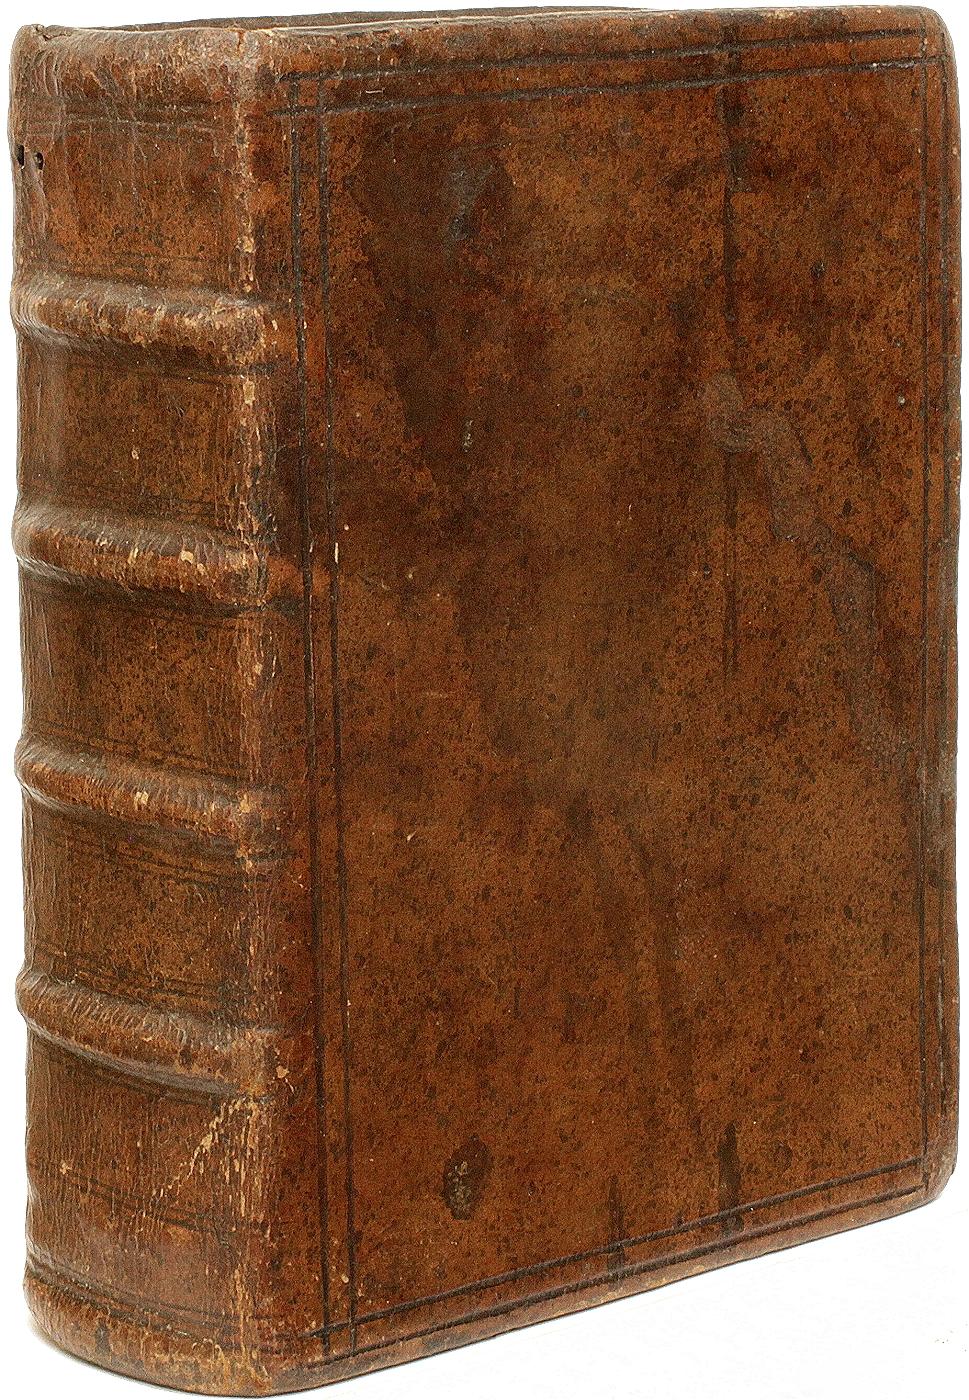 AUTHOR: HEYLYN, Peter. 

TITLE: Mikrokosmos. A Little Description of the Great World.

PUBLISHER: Oxford: by I. L. & W. T. for William Turner & Thomas Huggins, 1627.

DESCRIPTION: THIRD EDITION. 1vol., 7-3/8